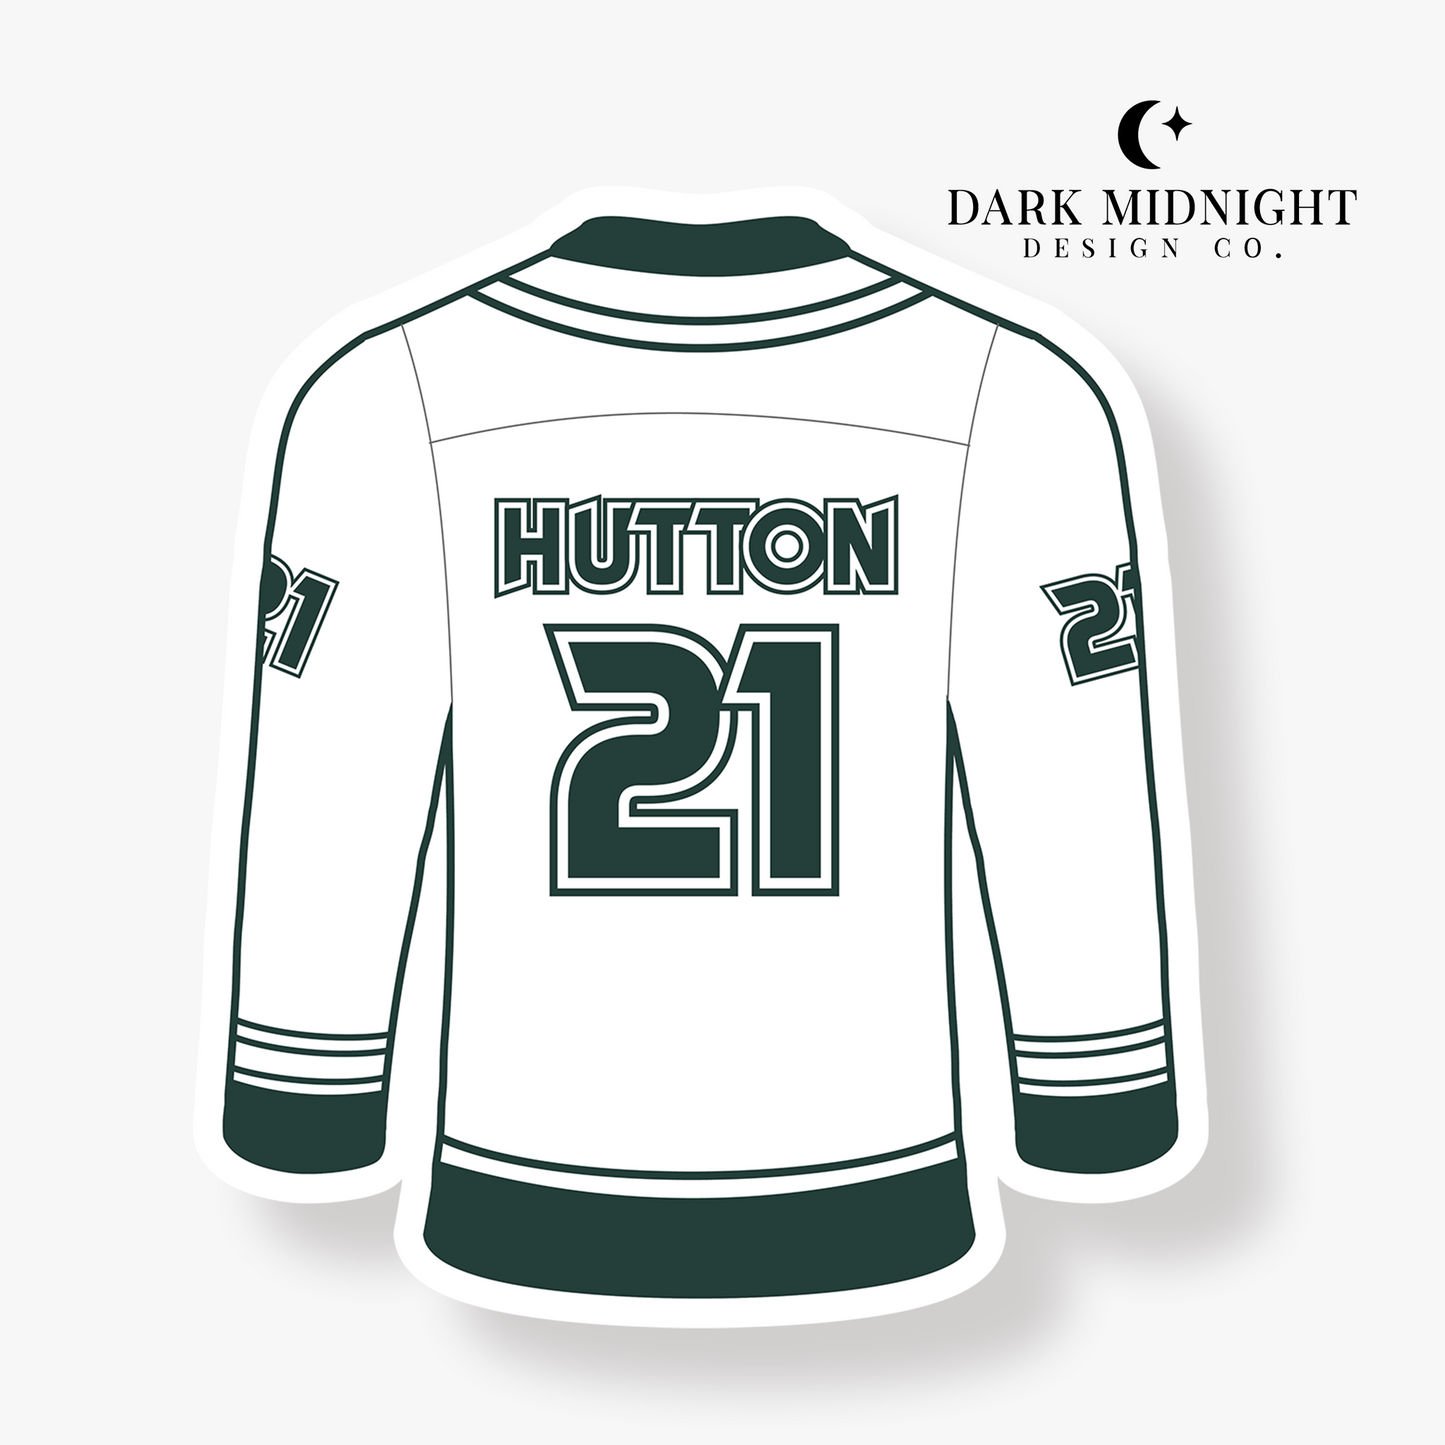 Maddox Hutton Vancouver Warriors Jersey Sticker - Officially Licensed Greatest Love Series